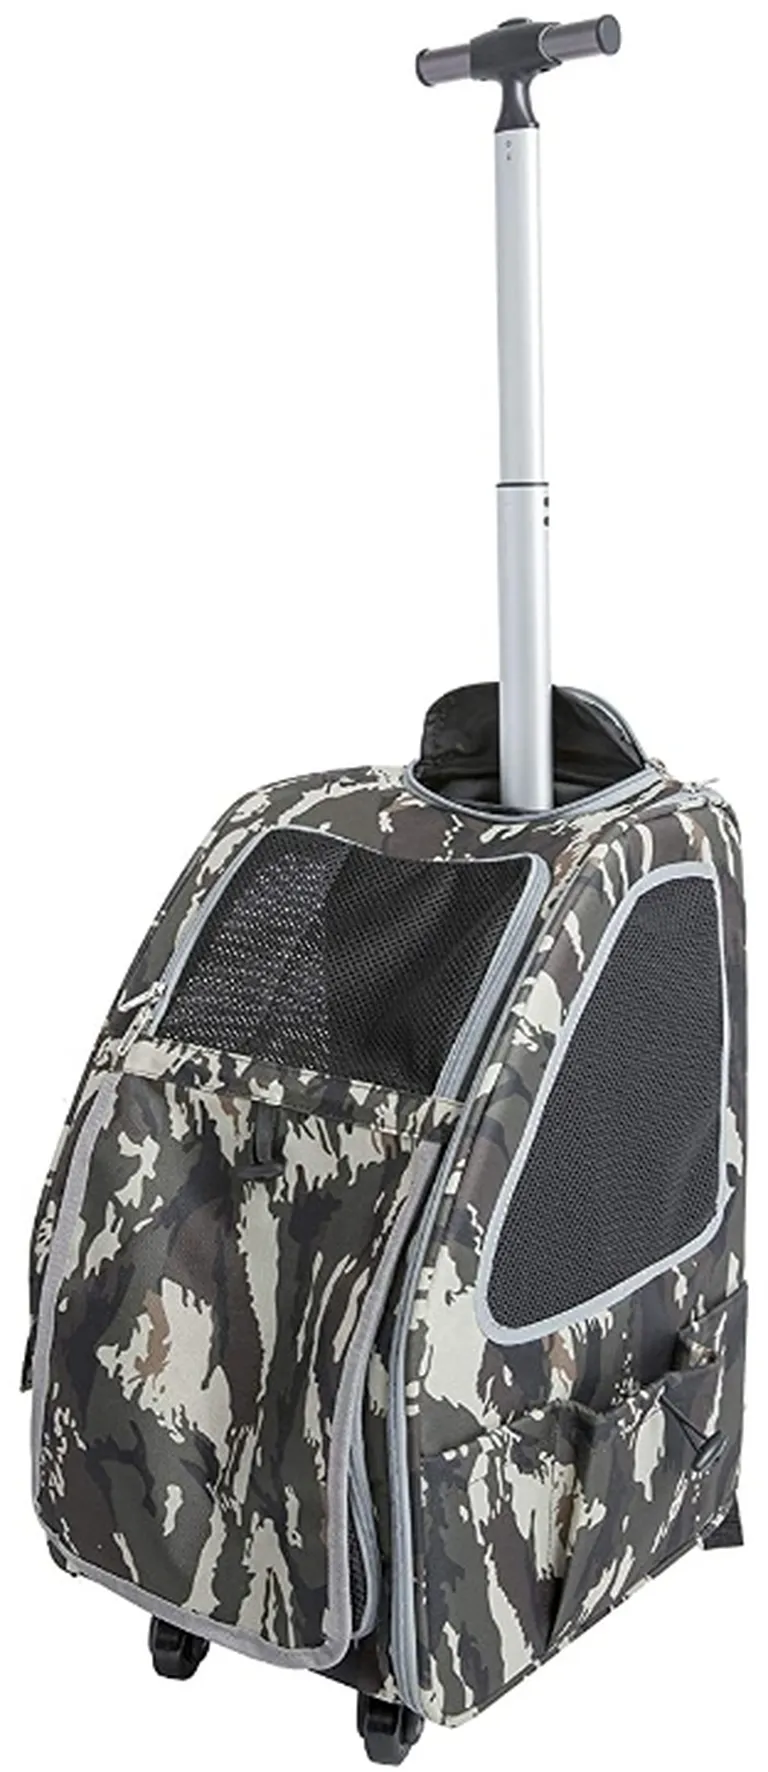 Petique 5-in-1 Pet Stroller Travel System Army Camo Photo 3